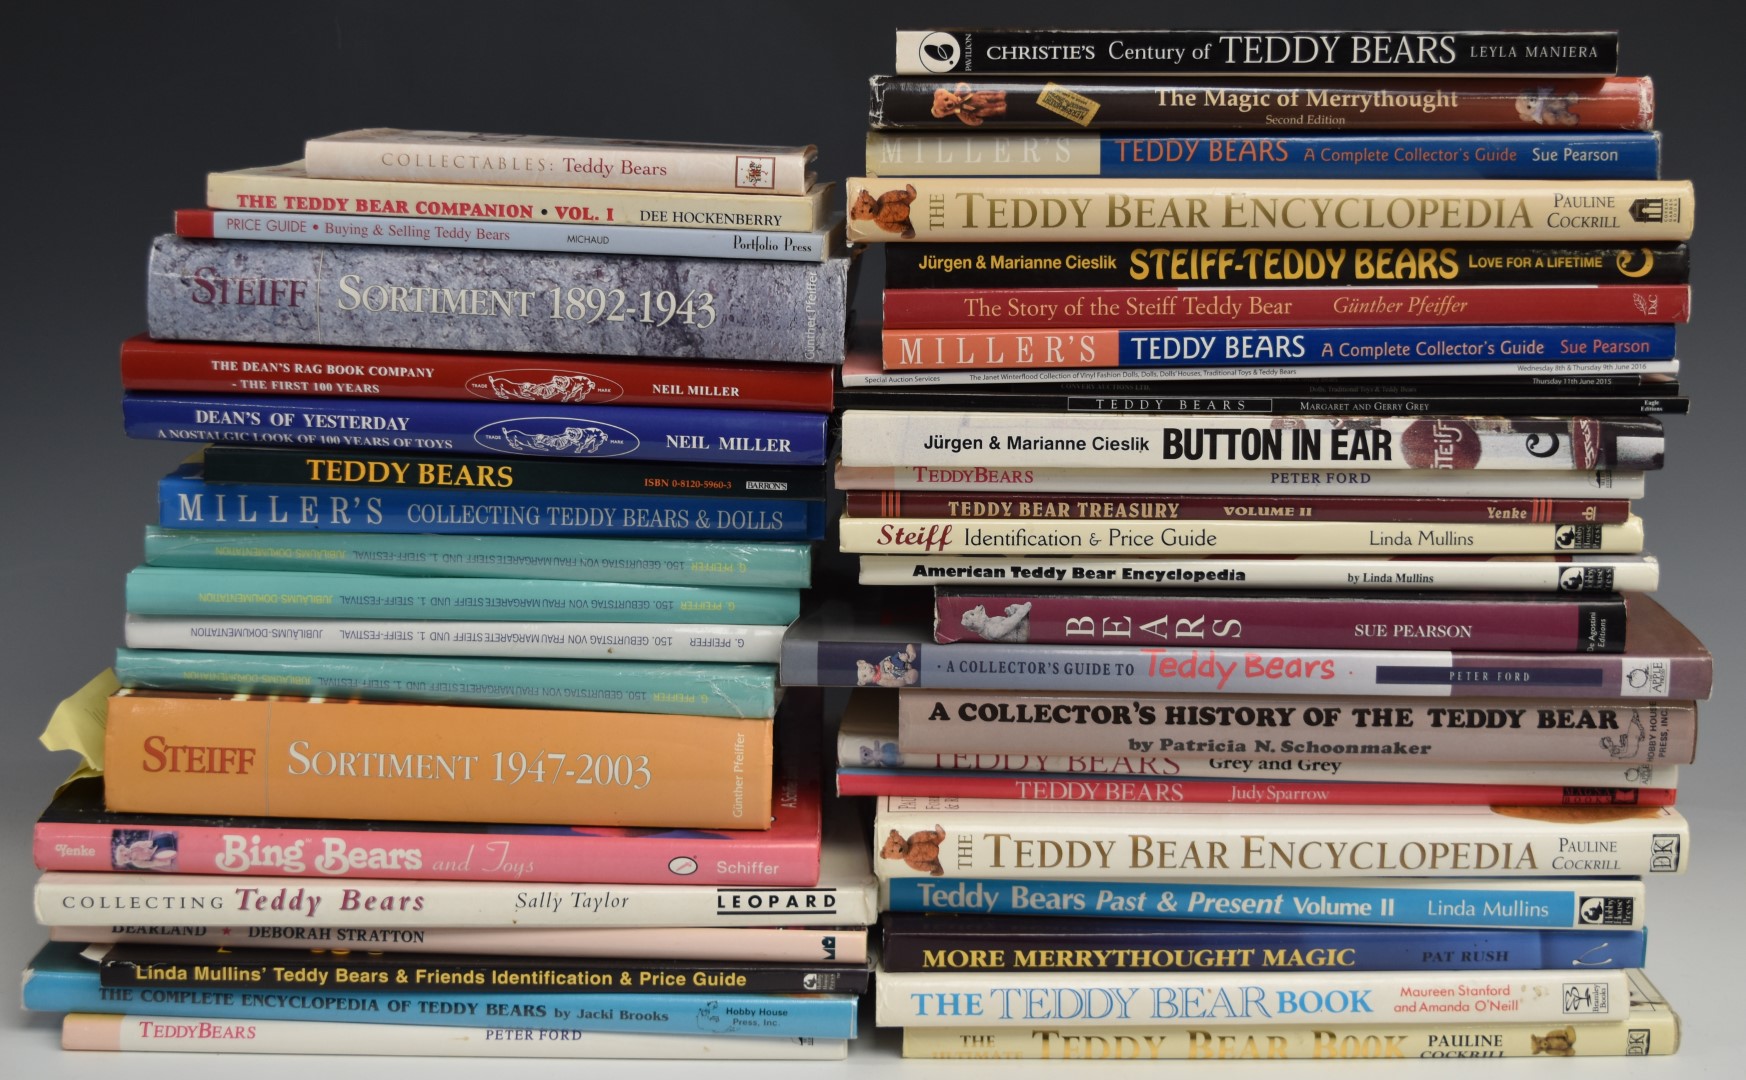 Forty-four Teddy bear related books including The Dean's Rag Book Company The First 100 Years and